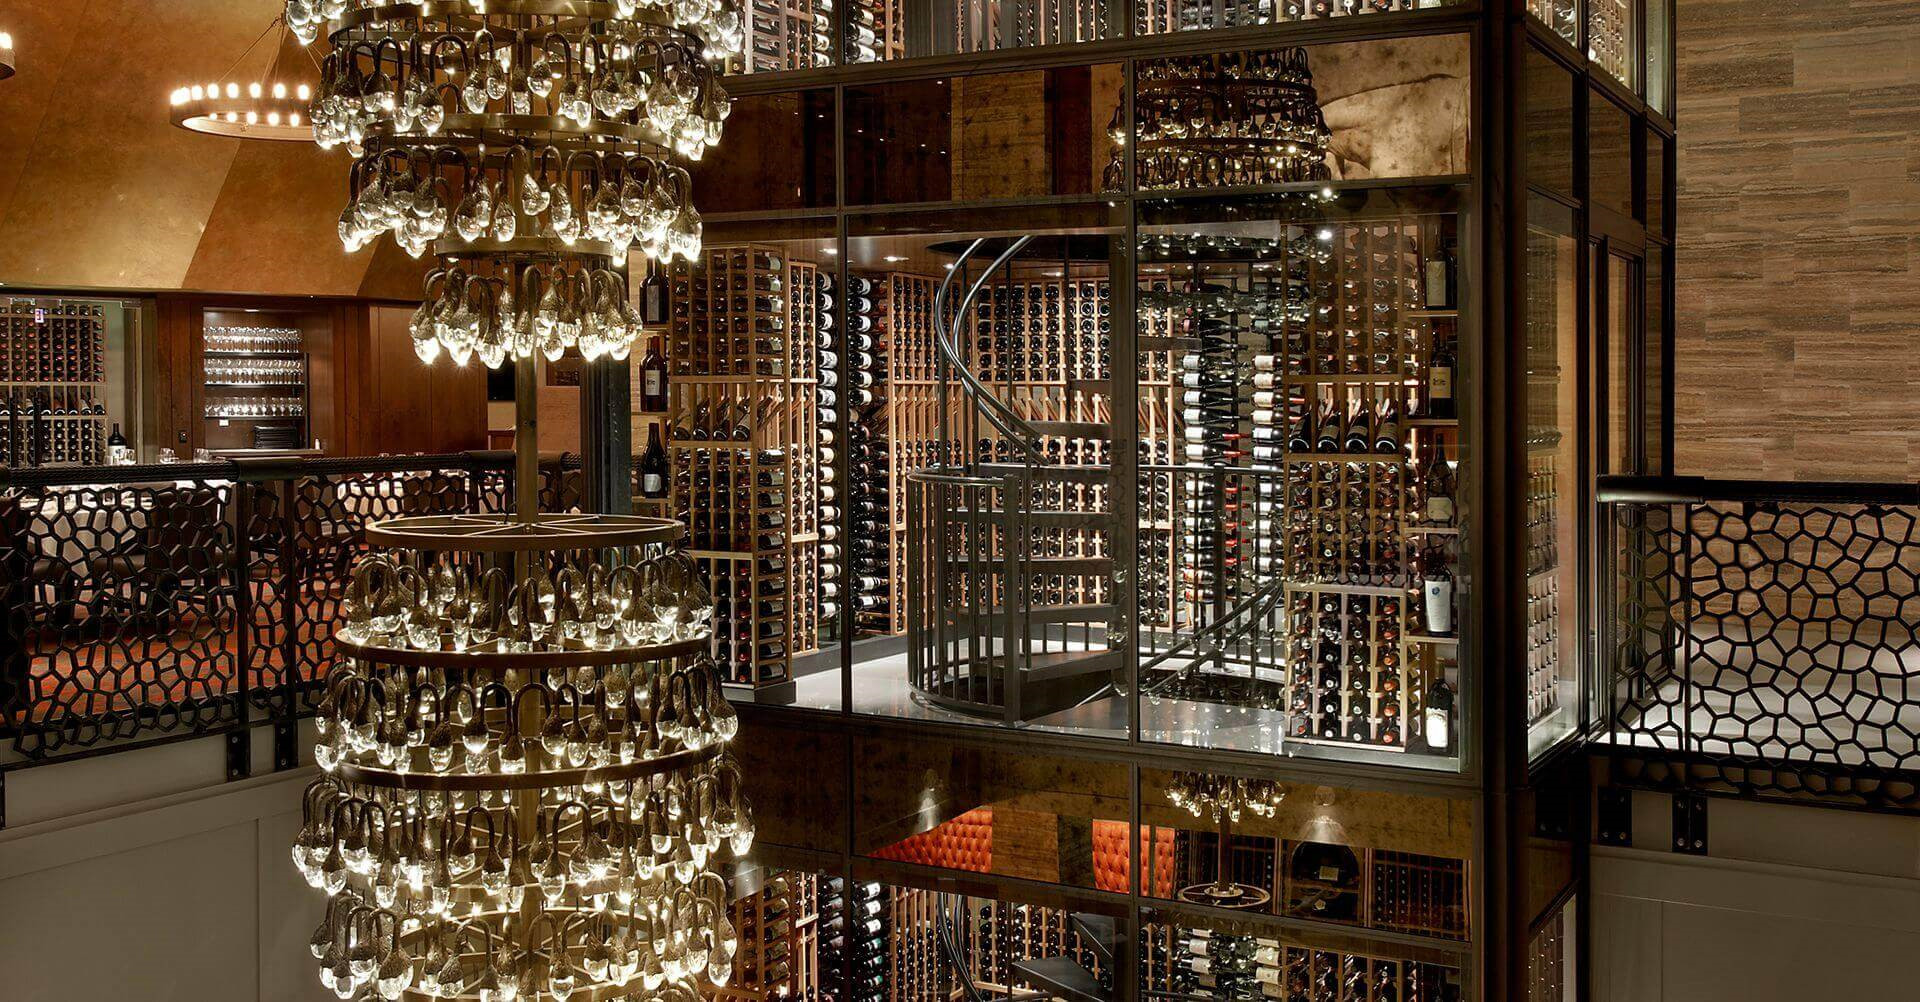 Del Frisco’s Chicago - Four Story Glass Enclosed Wine Cellar Tower with Traditional Wooden Racking